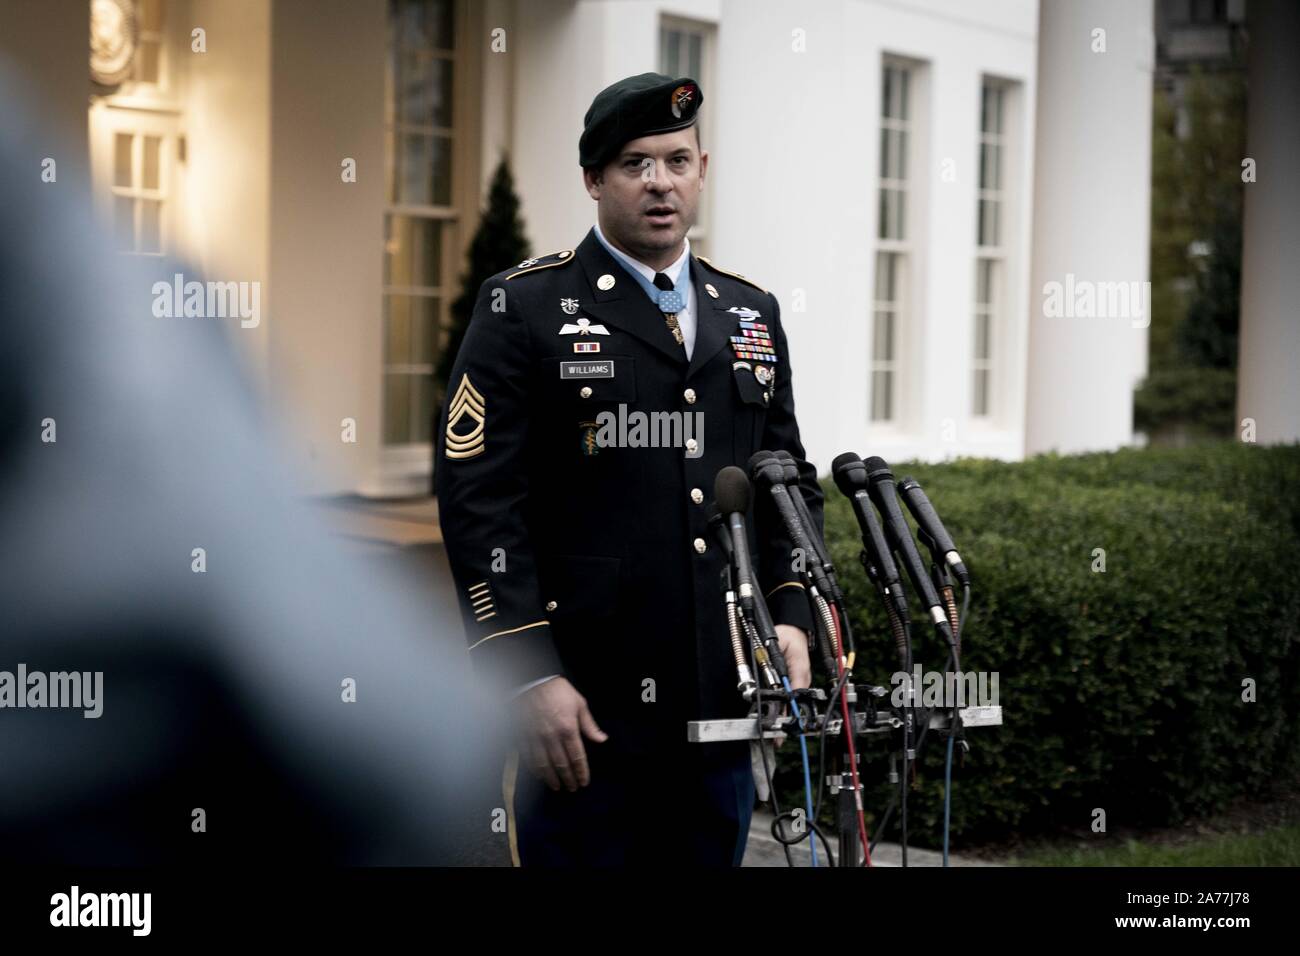 Washington, District of Columbia, USA. 30th Oct, 2019. Army Master Sgt. MATTHEW WILLIAMS, of Boerne, Texas, speaks to the press outside of the West Wing after President DONALD TRUMP awarded him the Medal of Honor, the nation's highest military honor, for his heroic actions while serving in Afghanistan's Shok Valley in 2008. Oct. 30, 2019 Credit: Douglas Christian/ZUMA Wire/Alamy Live News Stock Photo